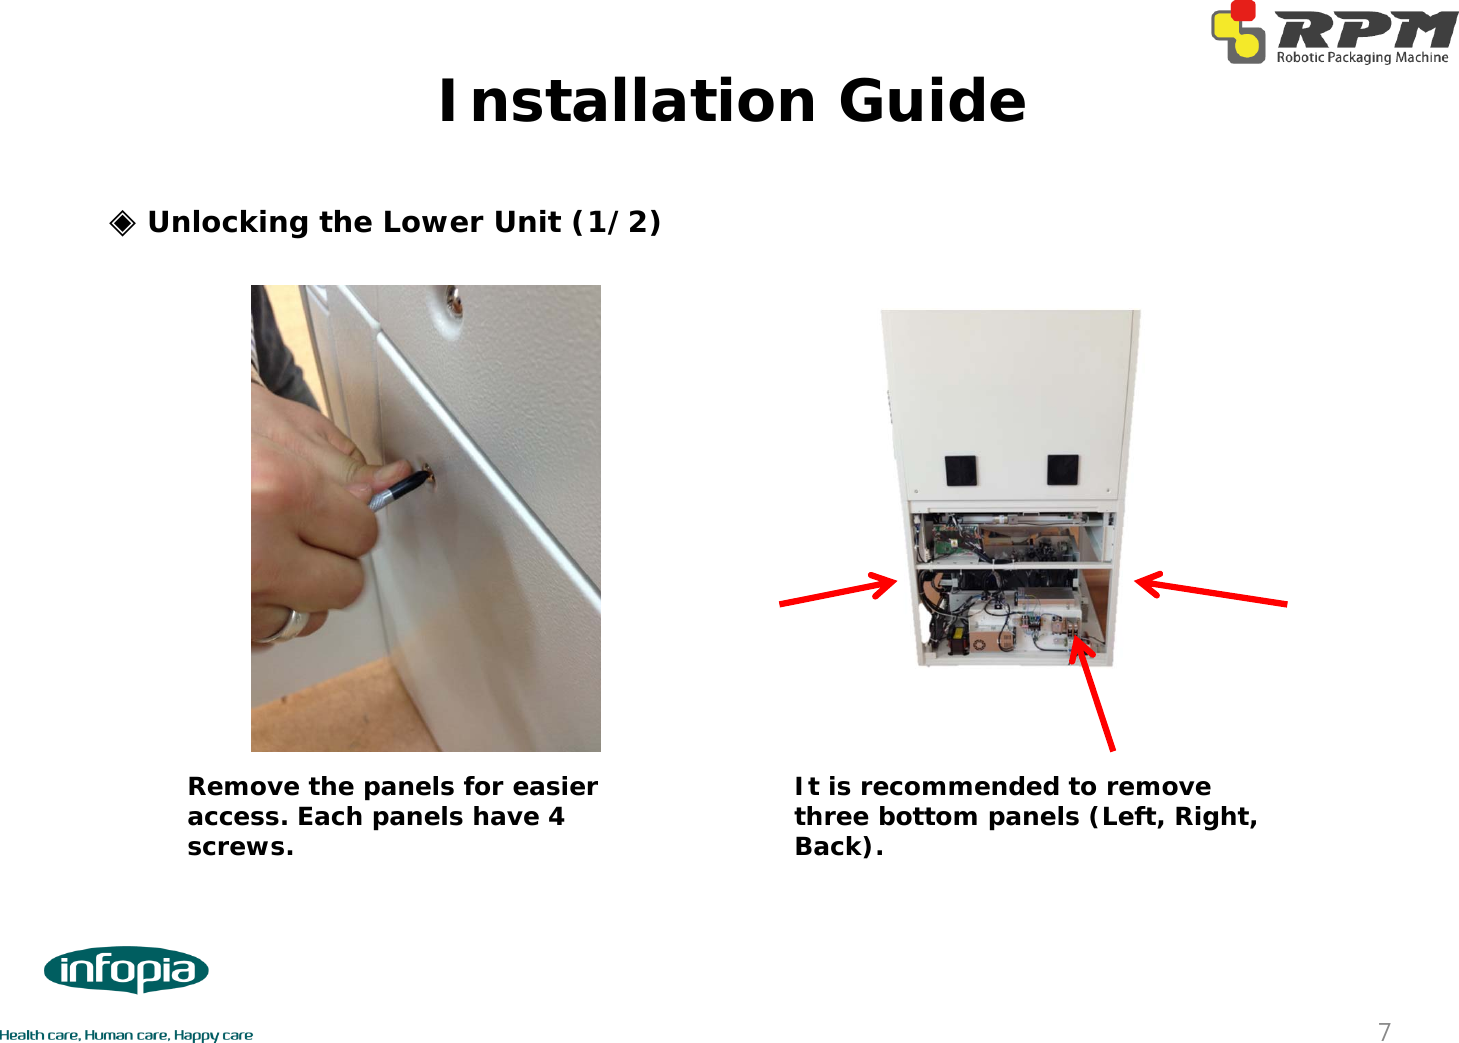 Installation Guide7◈Unlocking the Lower Unit (1/2)Remove the panels for easier access. Each panels have 4 screws.It is recommended to remove three bottom panels (Left, Right, Back).